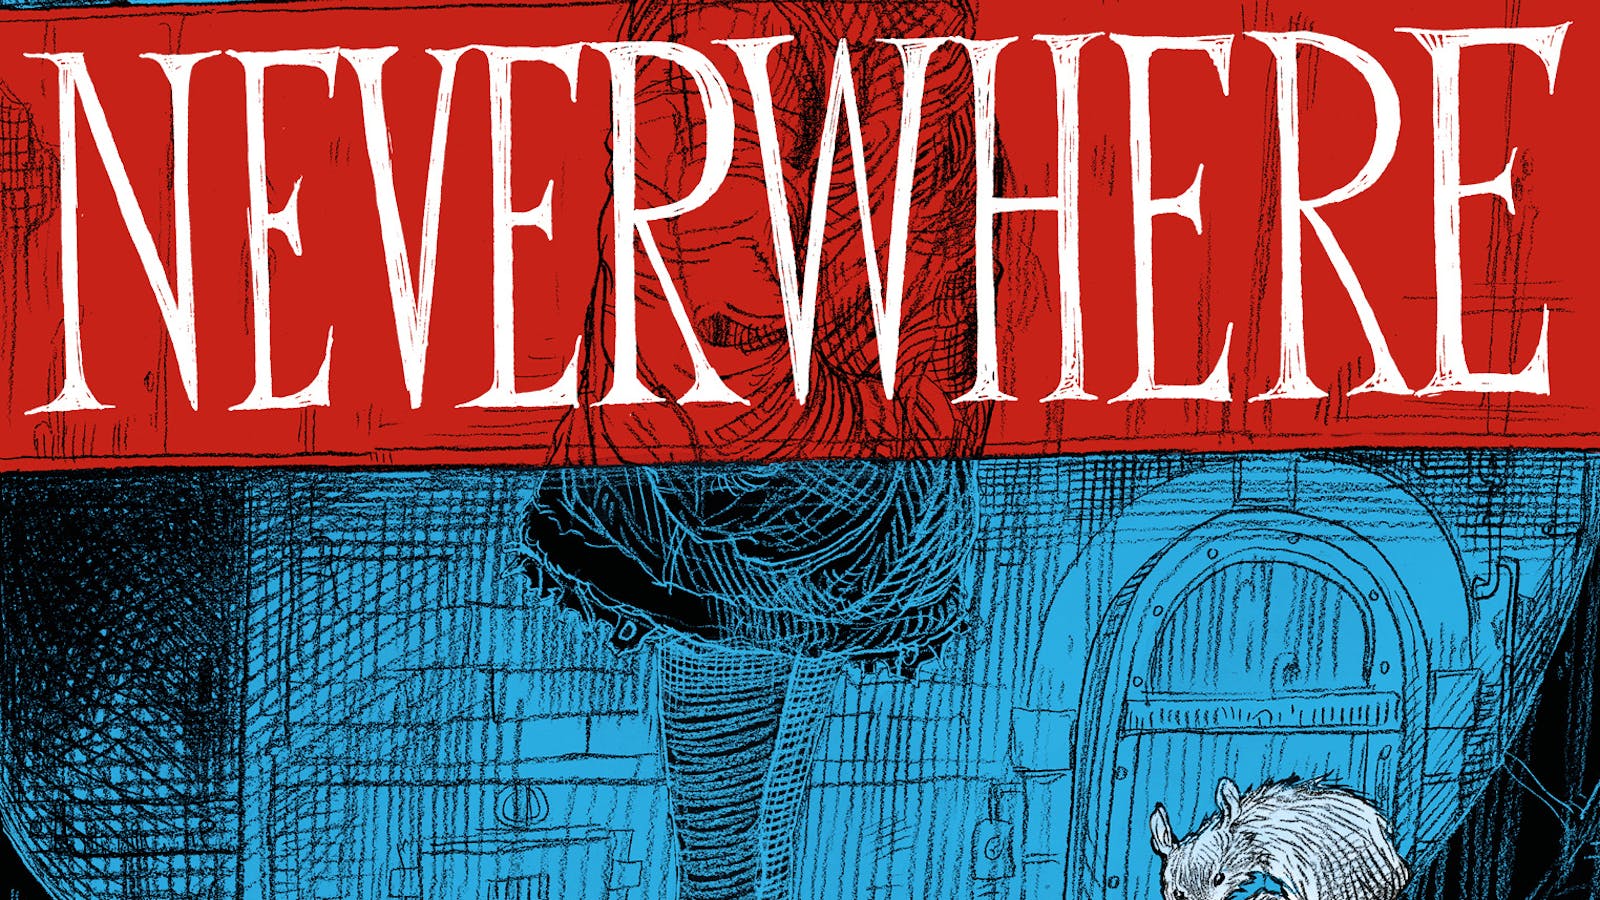 Review: The Extraordinary Neverwhere by Neil Gaiman